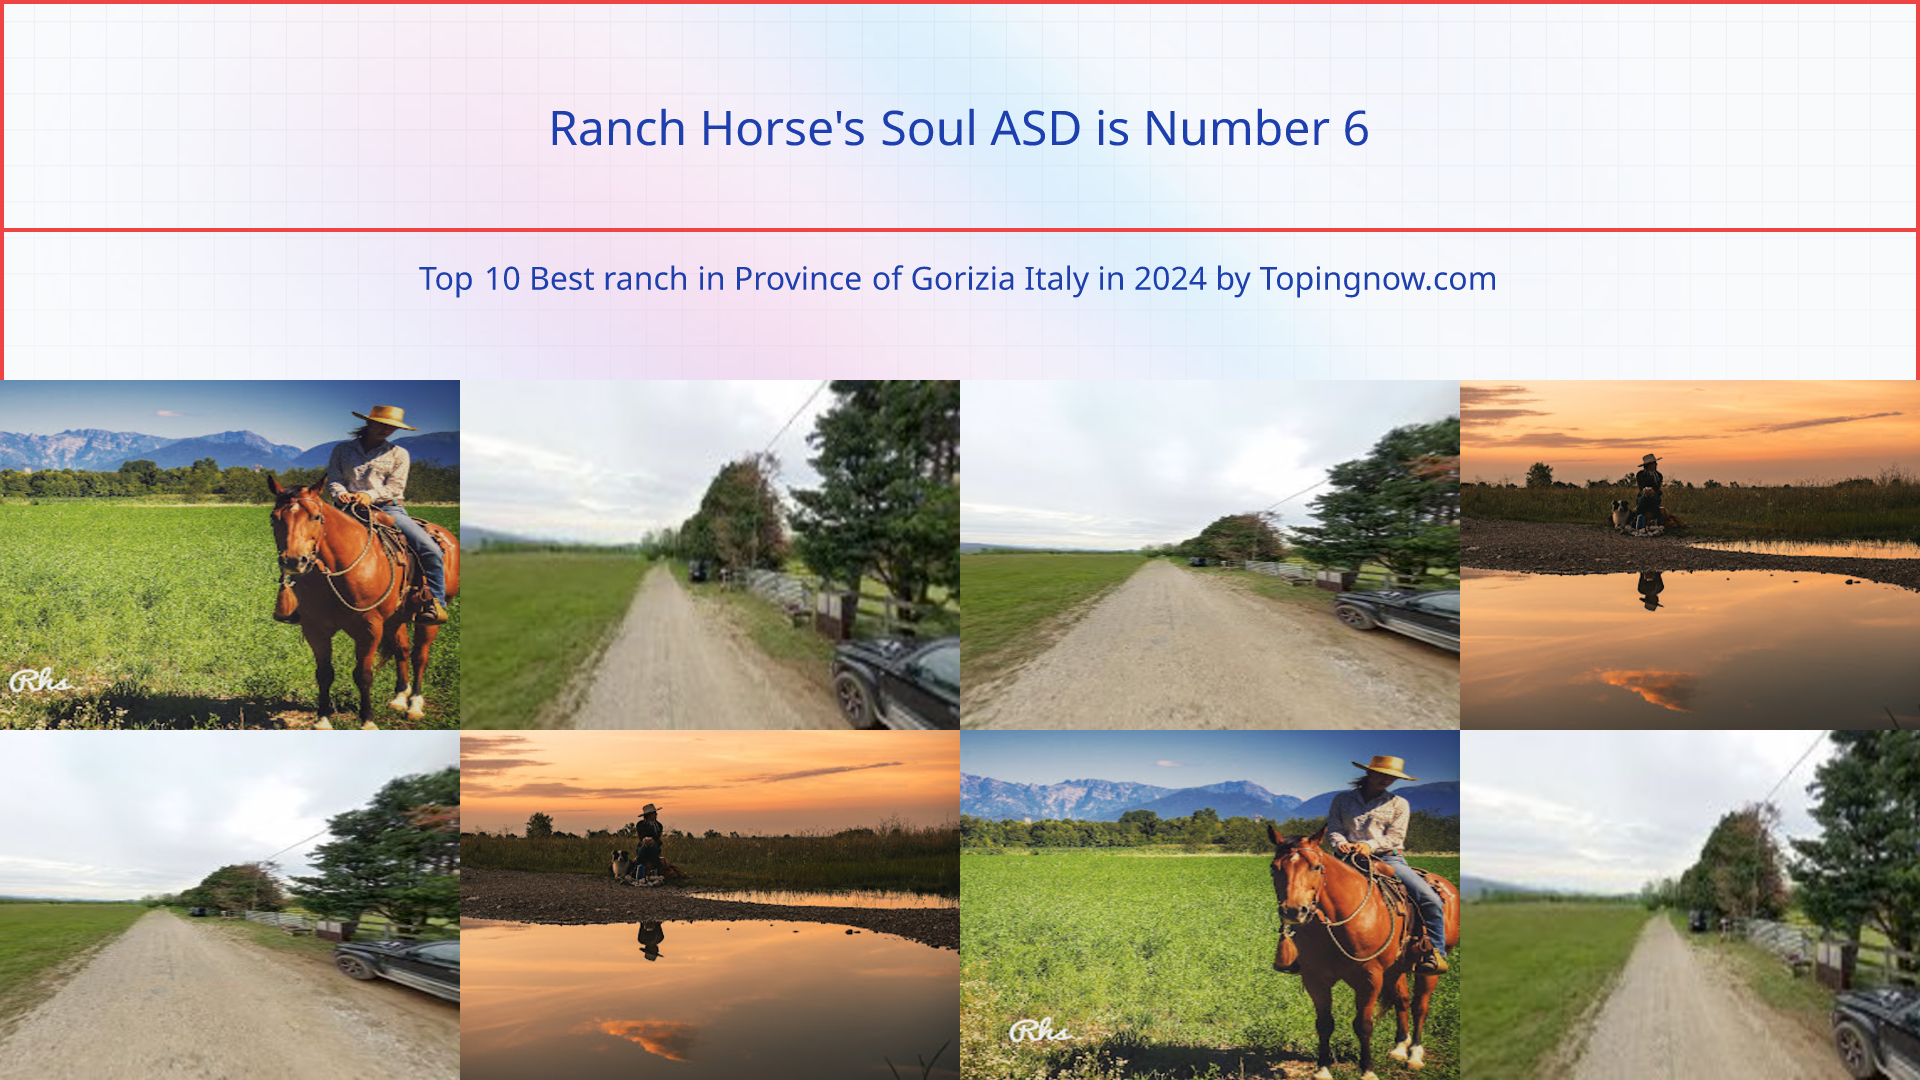 Ranch Horse's Soul ASD: Top 10 Best ranch in Province of Gorizia Italy in 2024